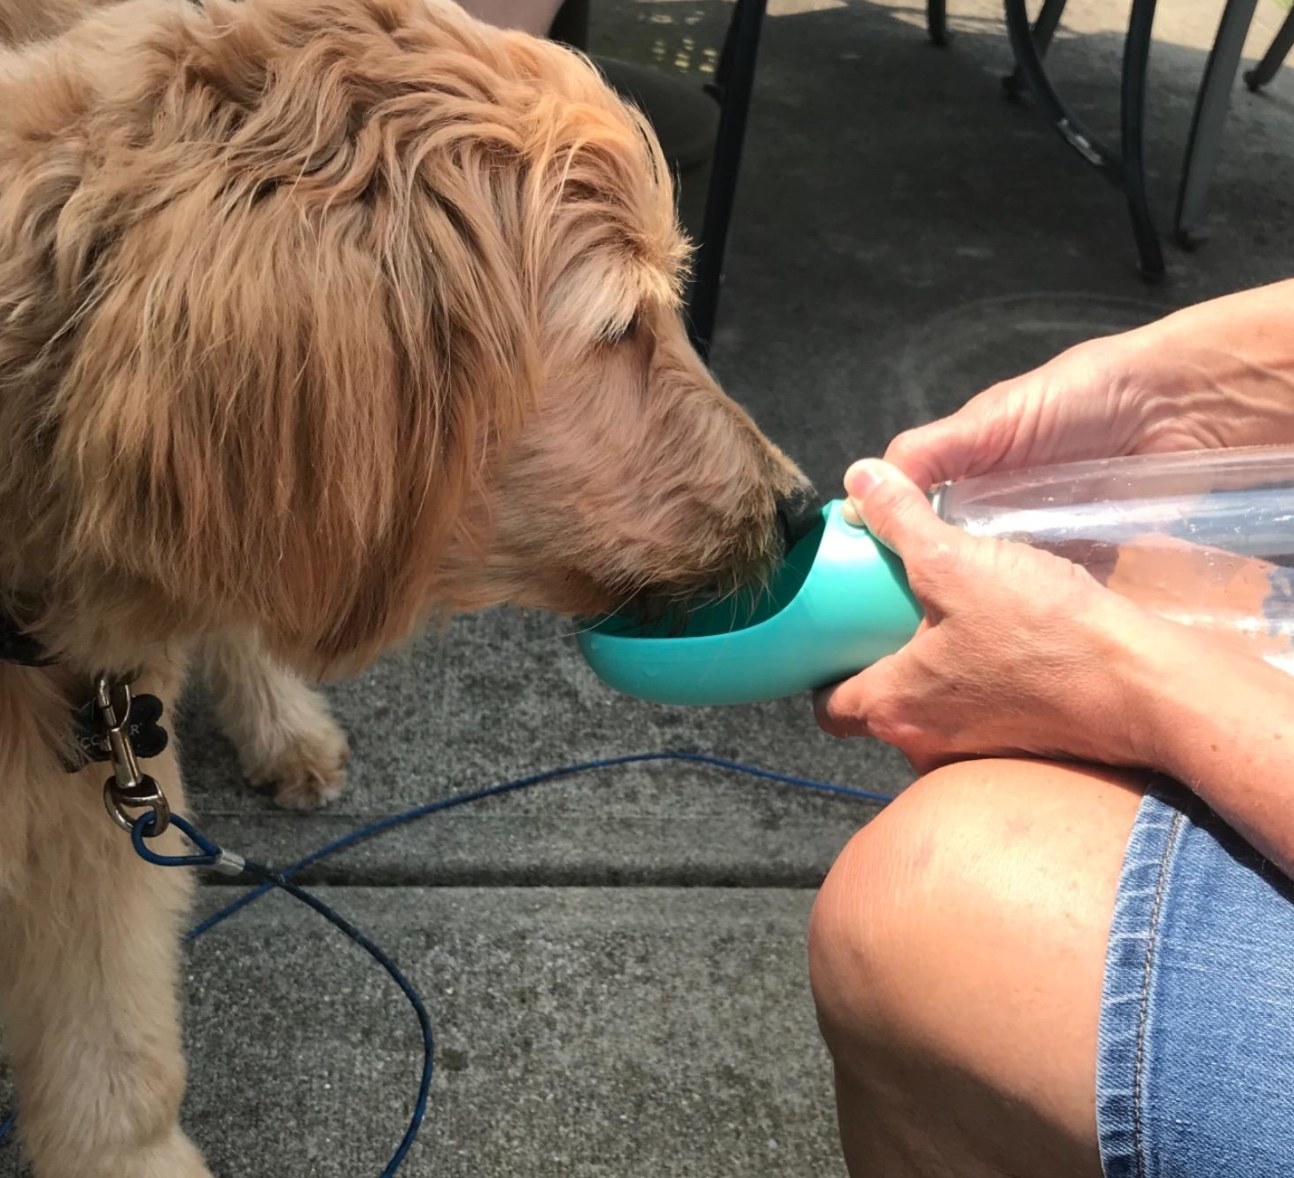 The reviewer&#x27;s image of their dog drinking out of the reusable water bottle